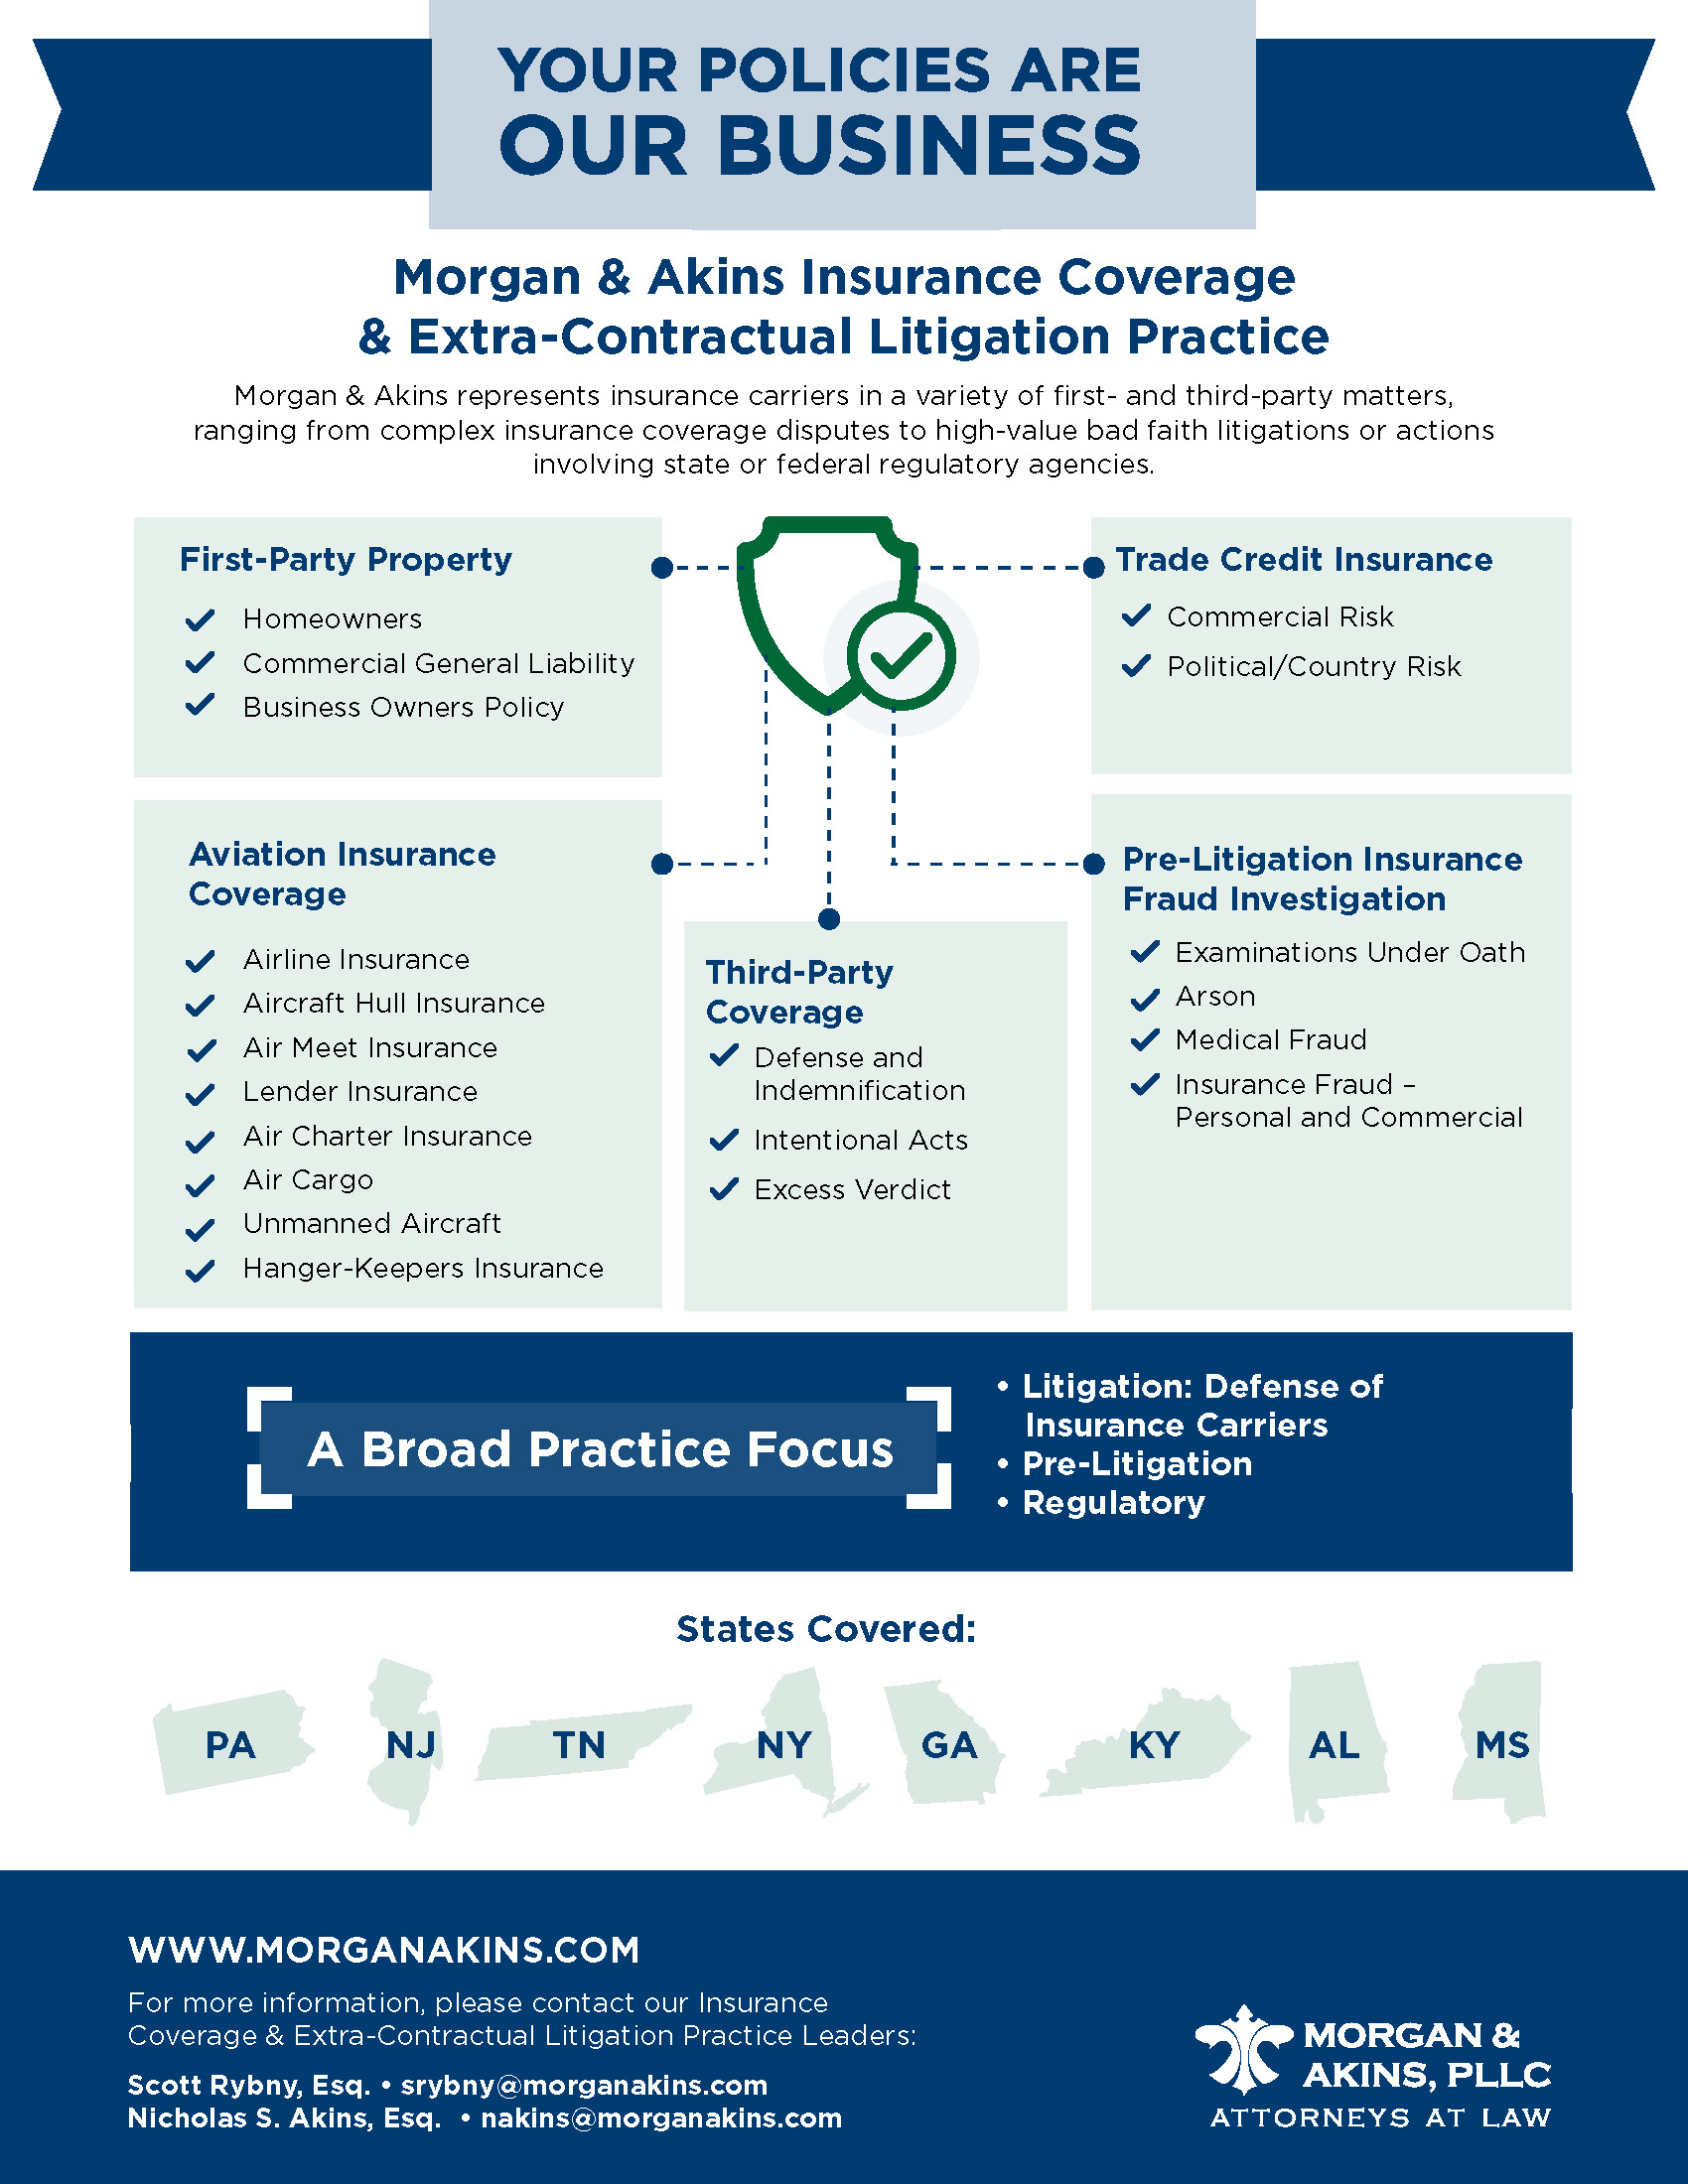 Infographic for Morgan & Akins Insurance practice